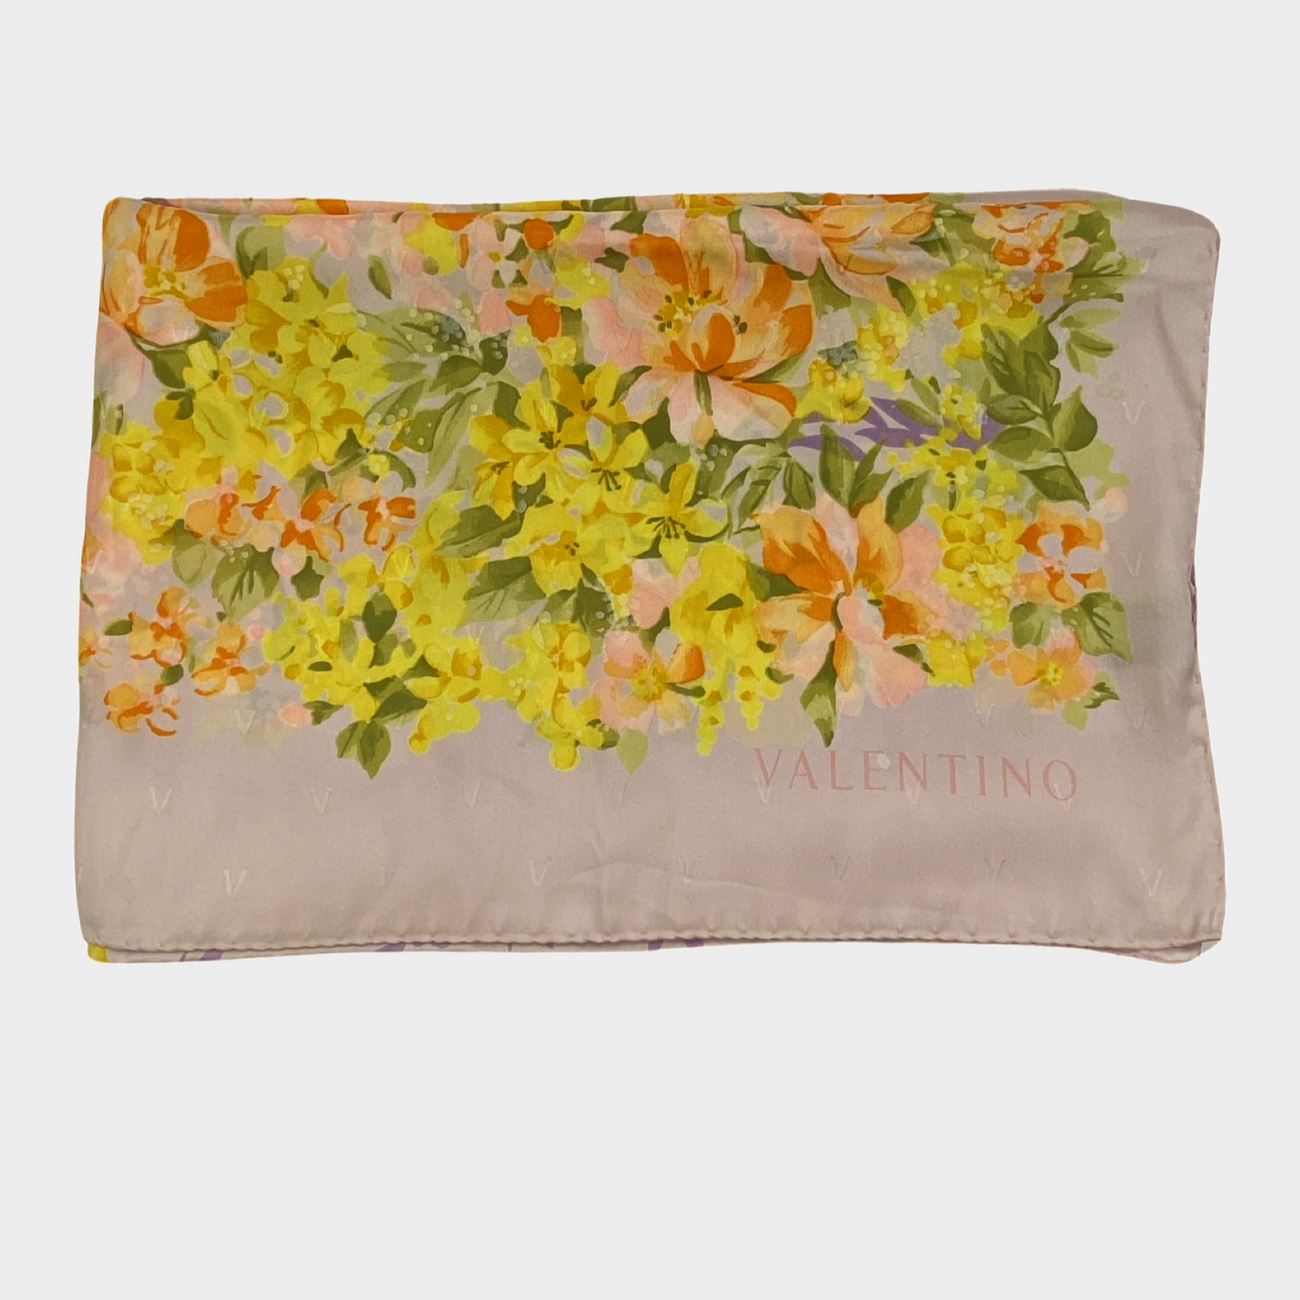 VALENTINO Silk scarf with floral decoration in foliage. …